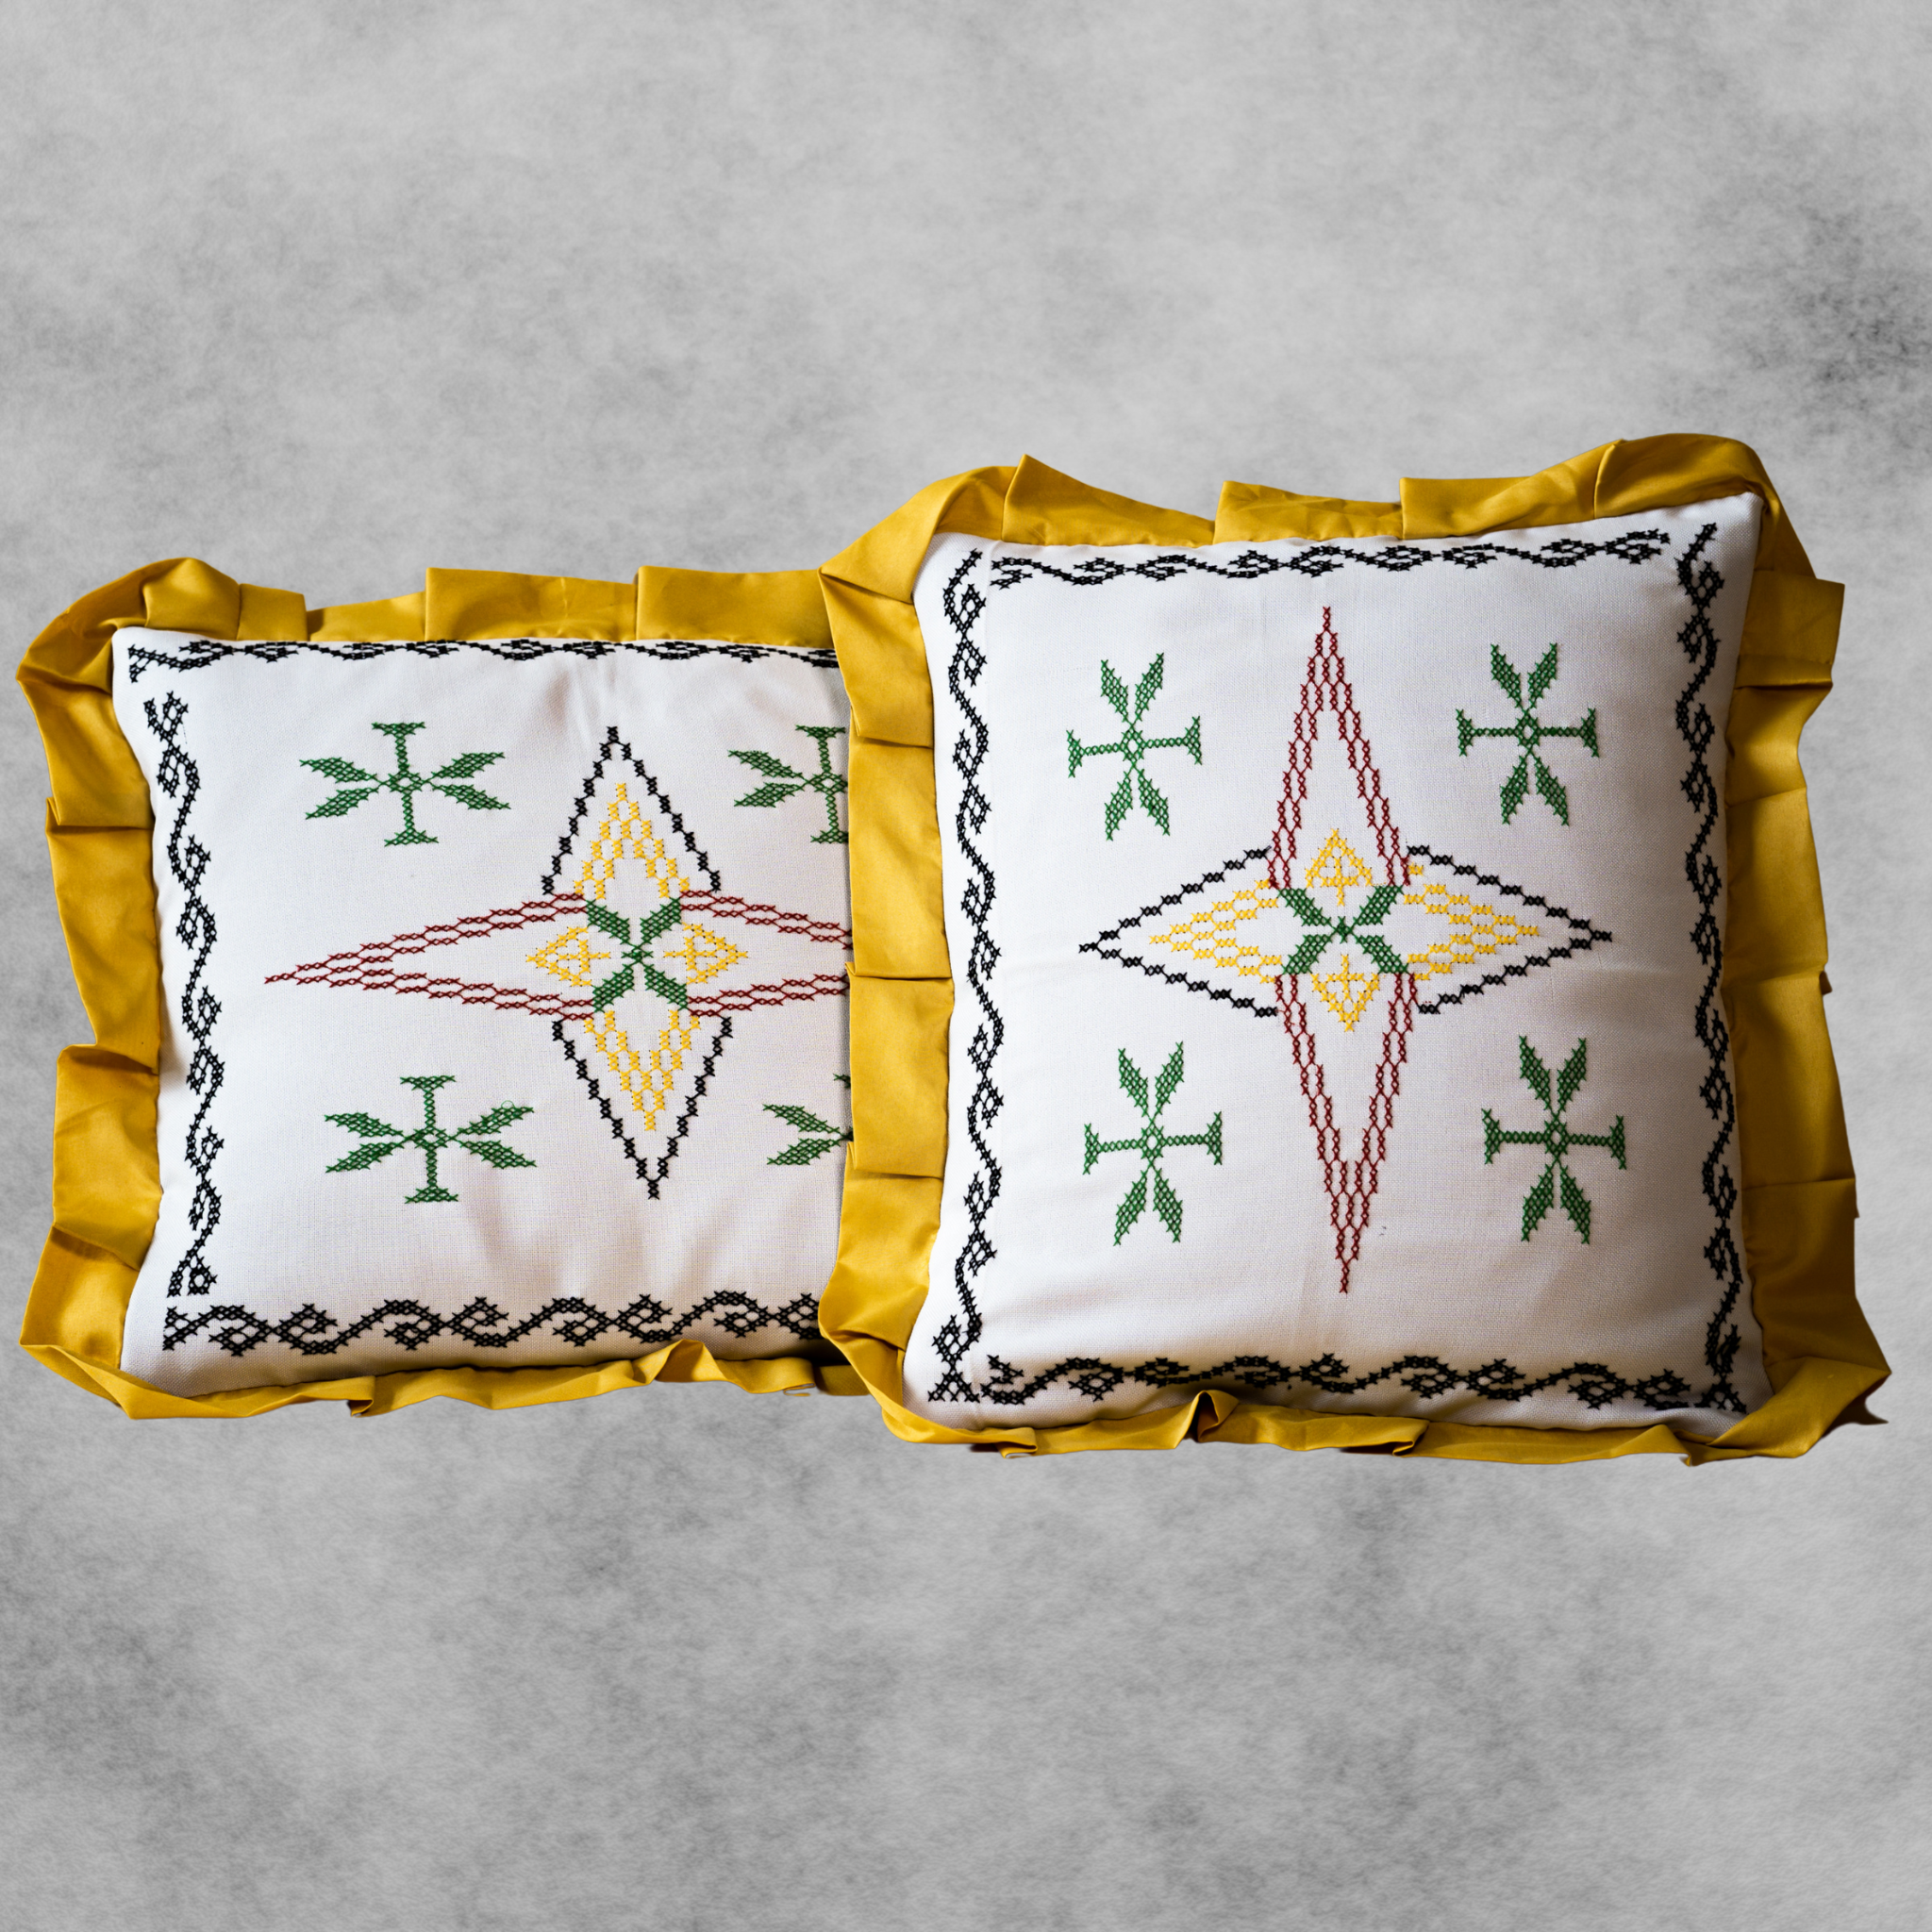 T'boli Pillow Cases (Pairs)